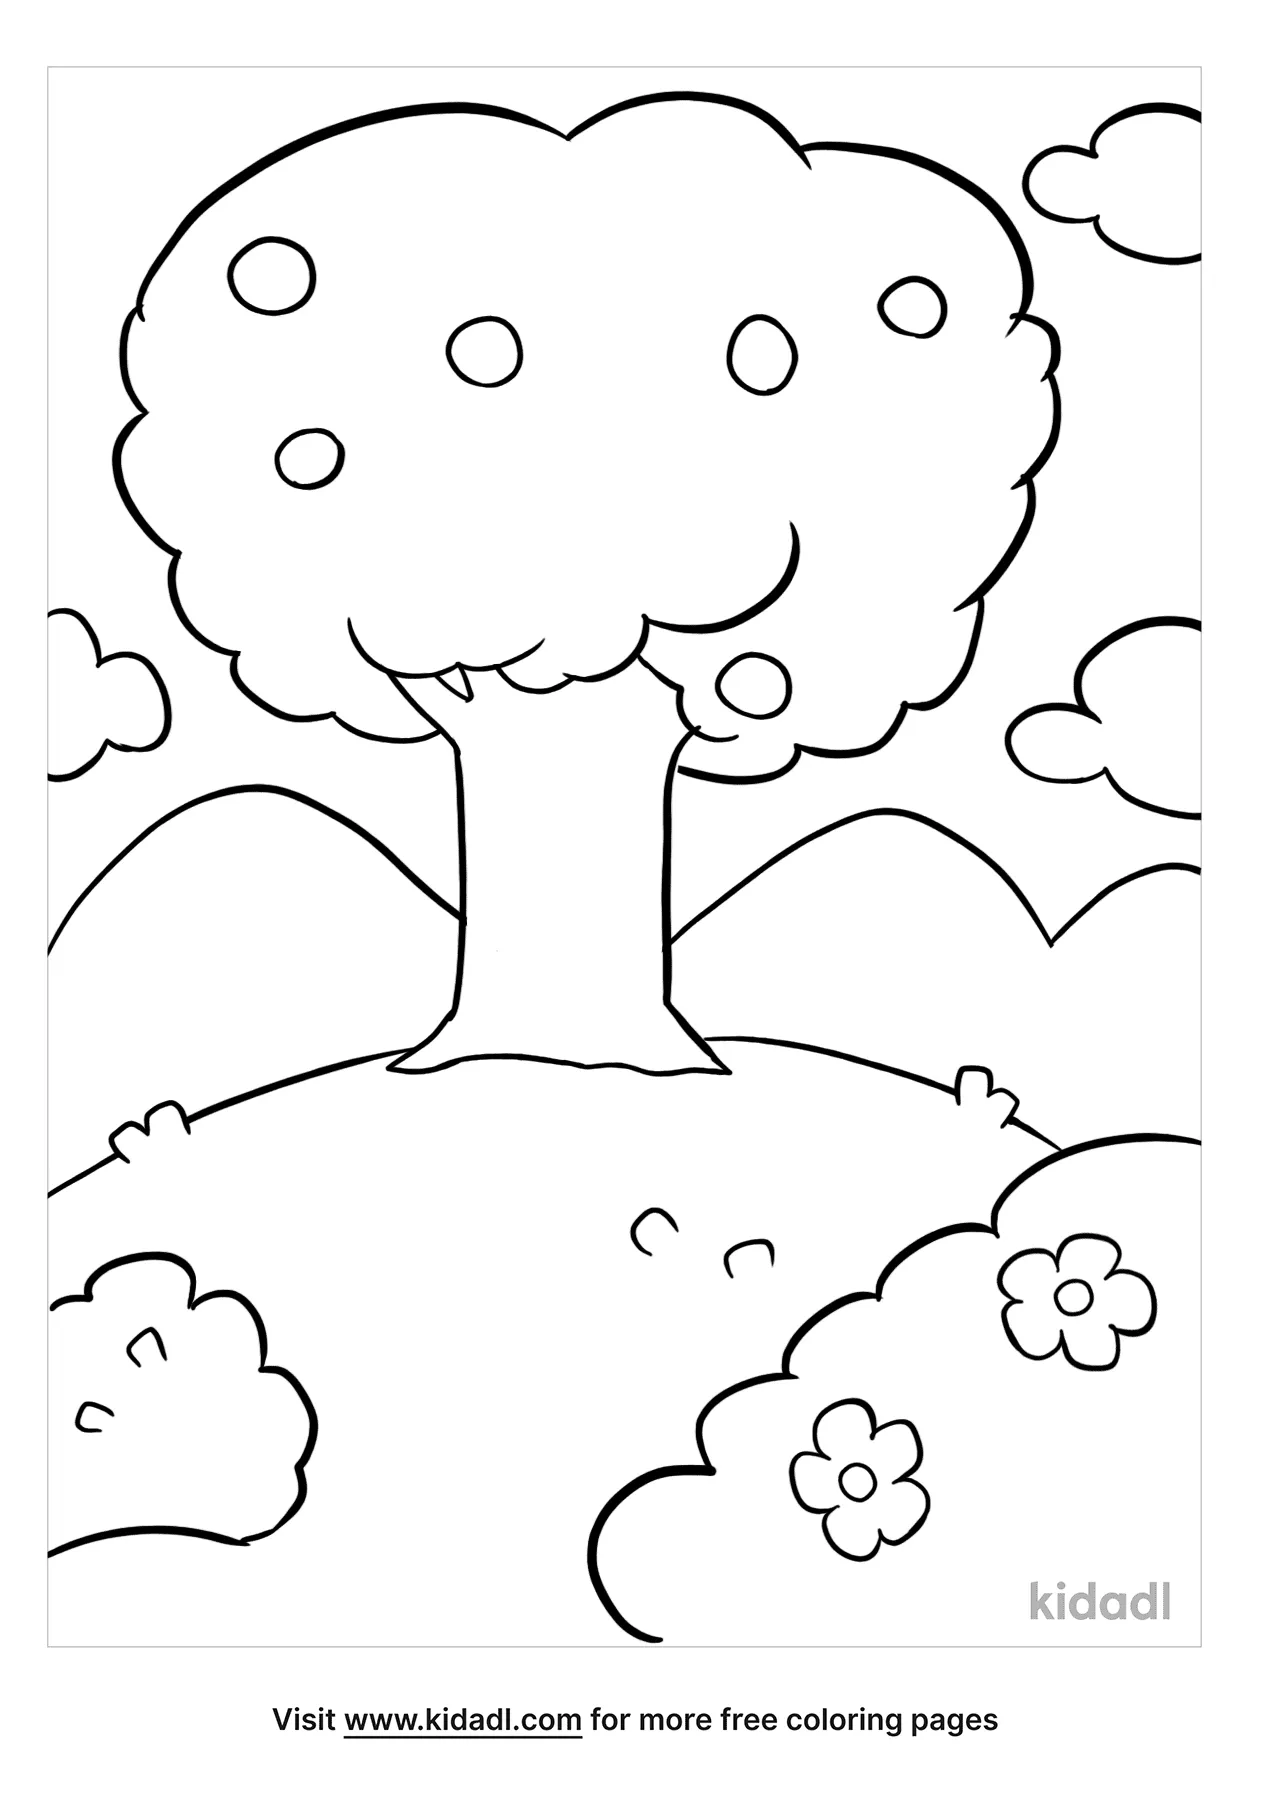 Free Background Coloring Page | Coloring Page Printables | Kidadl